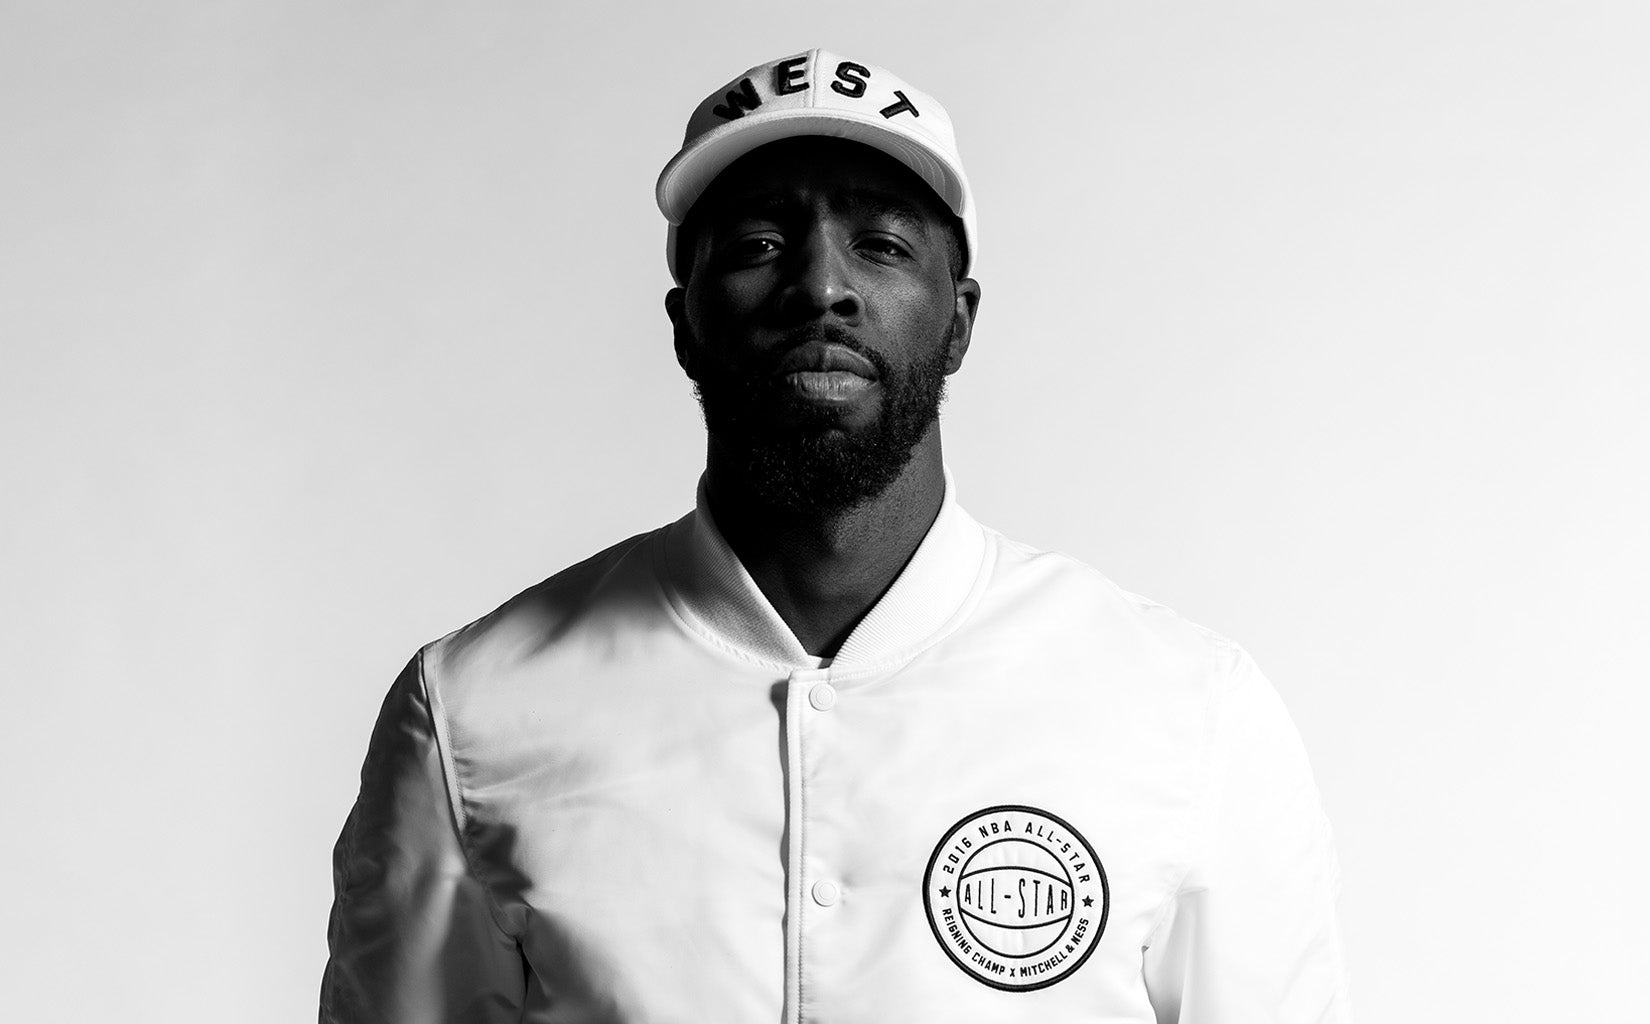 NBA All Star Collection x Reigning Champ